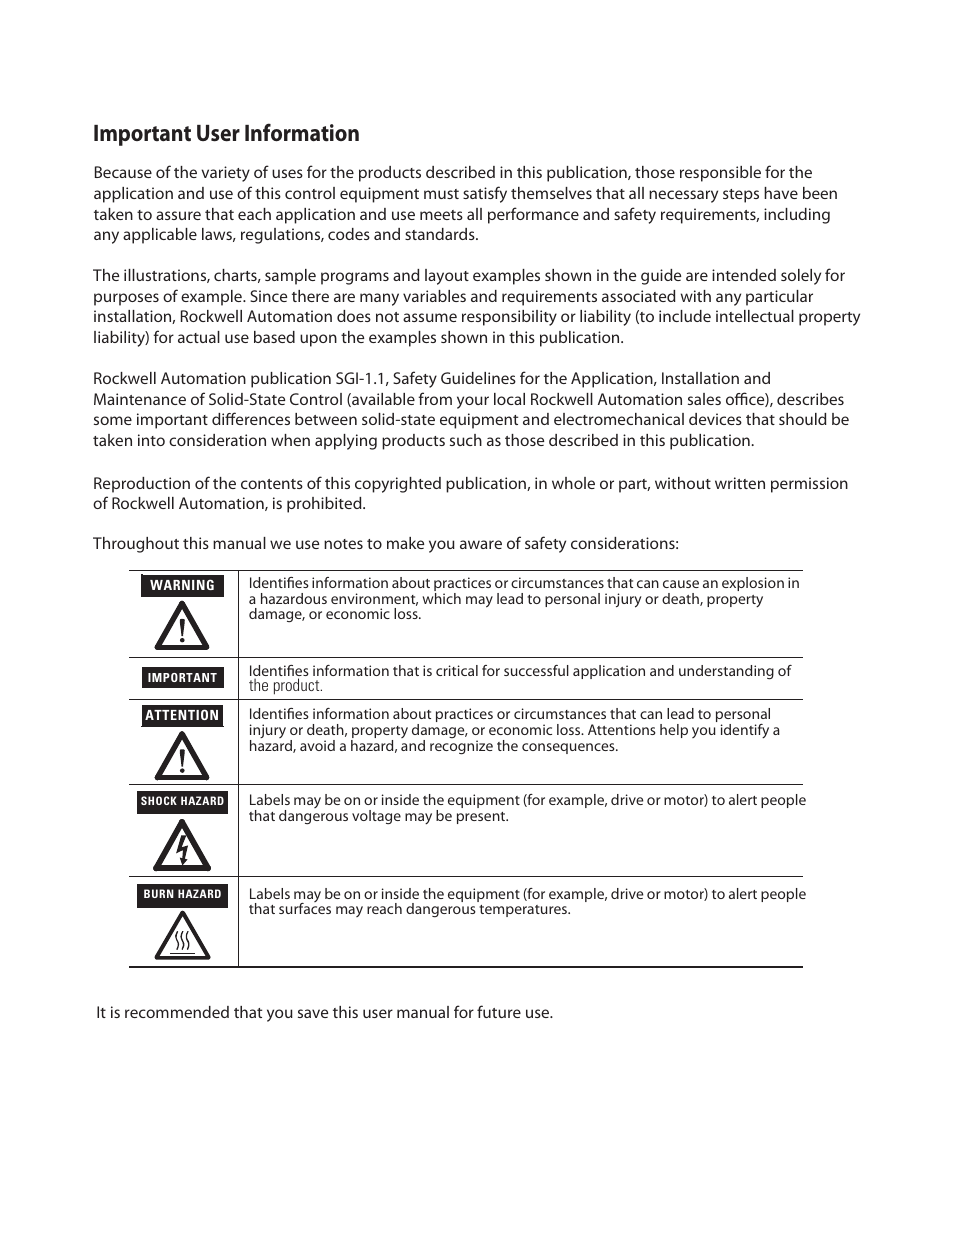 Important user information | Rockwell Automation 442L SafeZone Singlezone & Multizone Safety Laser Scanner User Manual | Page 2 / 60